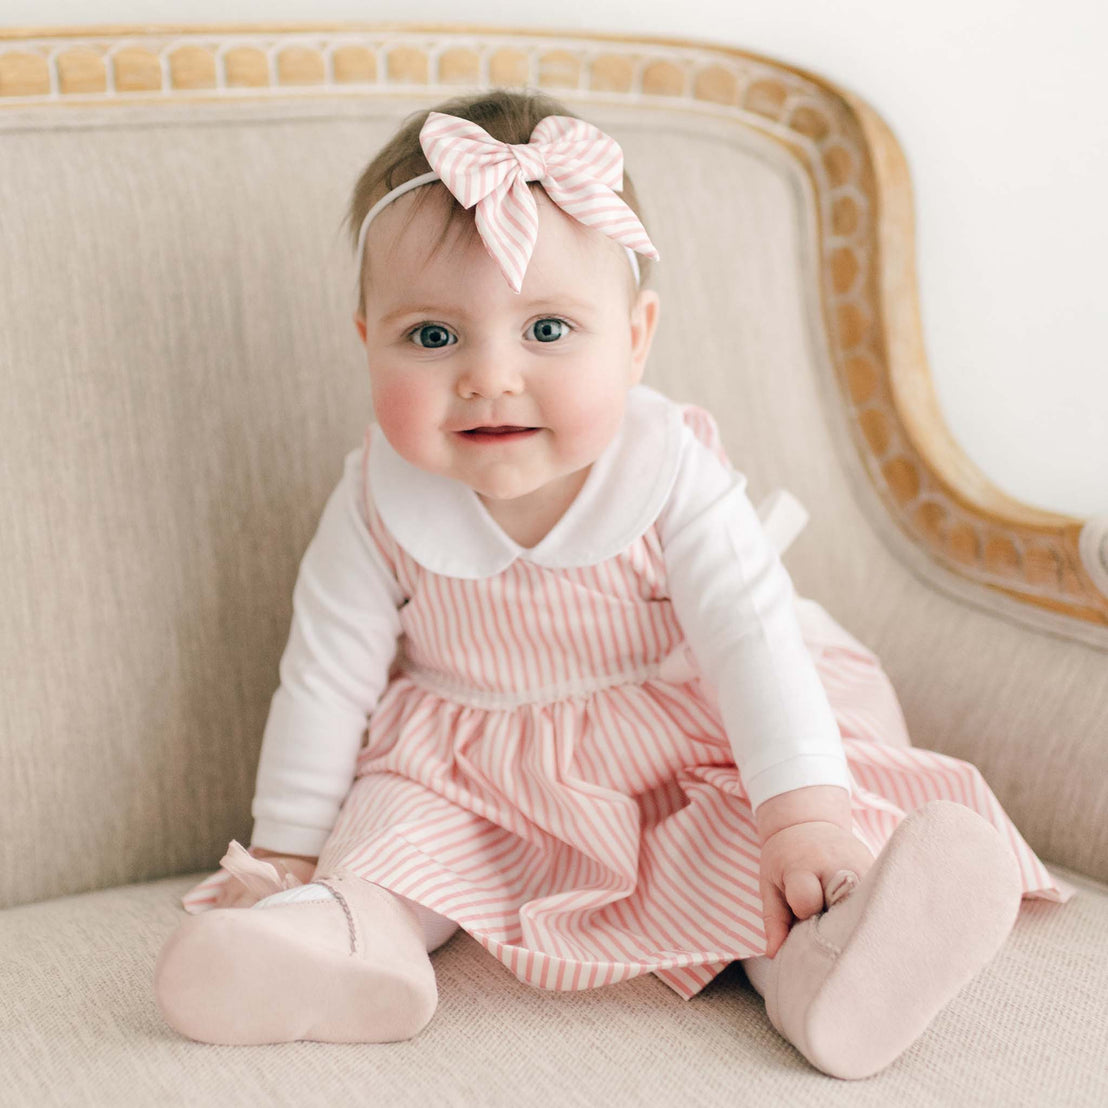 A cheerful baby with bright blue eyes in a Thea Wrap Dress, a striped pink and white dress, with the matching Thea Bow Headband, sitting on a beige sofa.